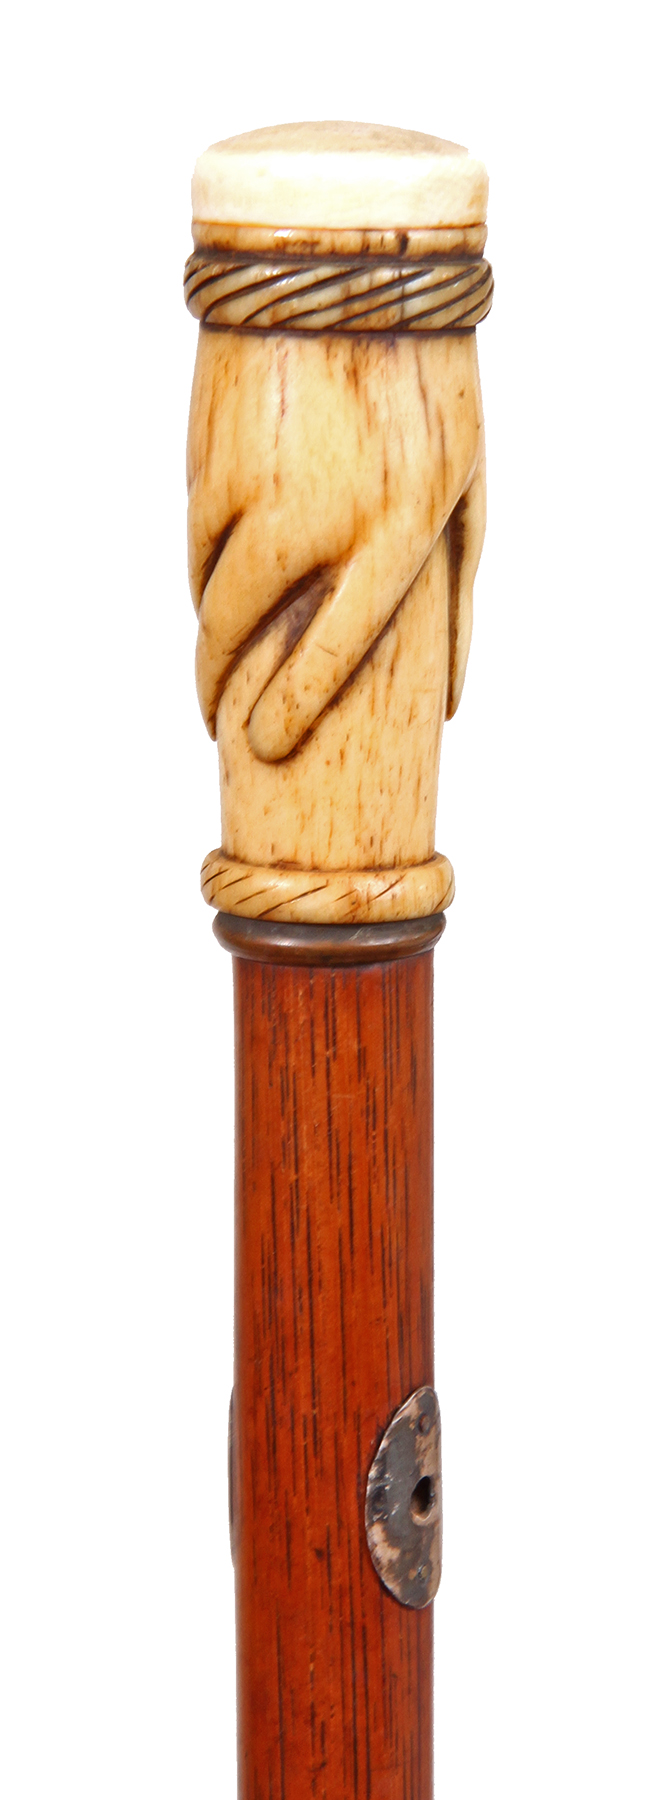 Antique and Quality Modern Cane Auction - 109.jpg